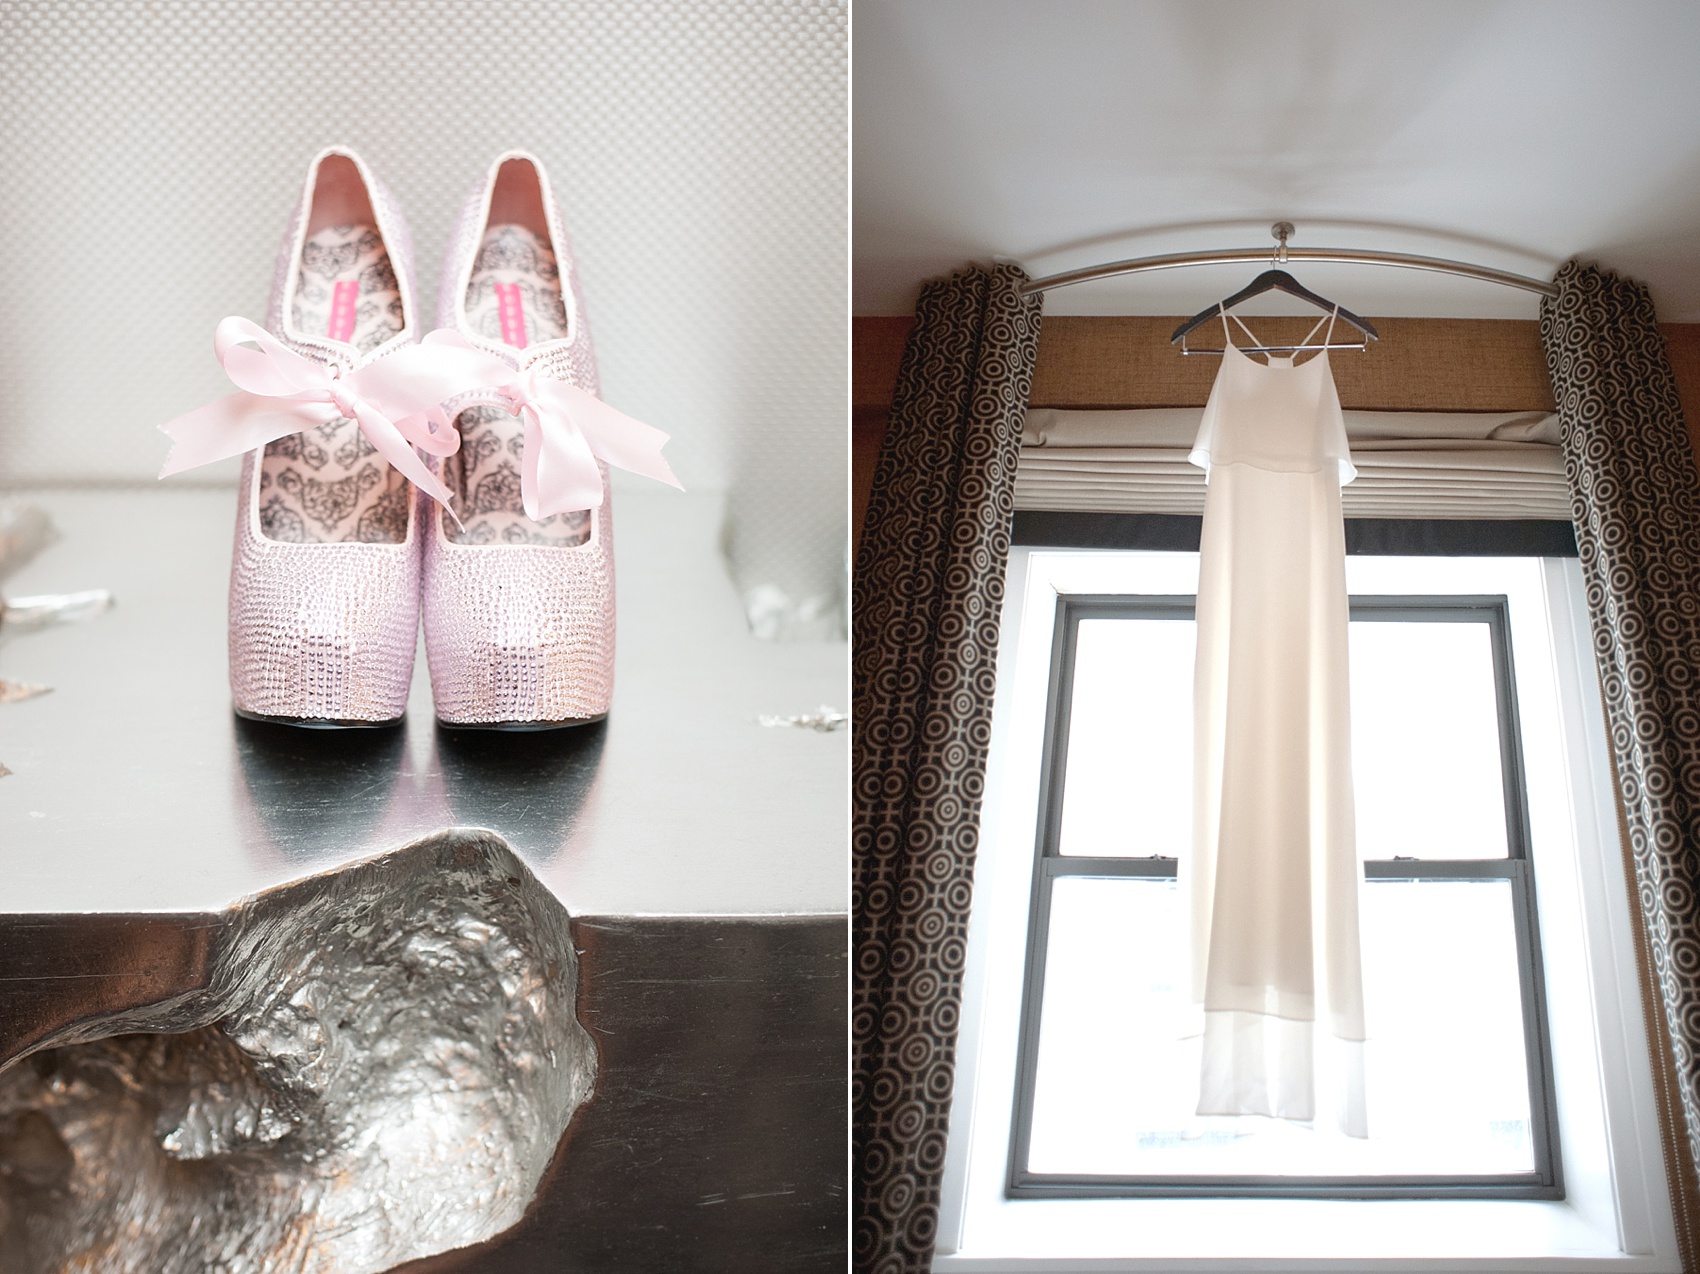 The bride's simple chiffon wedding gown for her same sex wedding. Elopement in Central Park with photos by Mikkel Paige Photography. #nycwedidng #samesexmarriage #equality #nudeheels #weddingoutfit #nycweddingphotographer